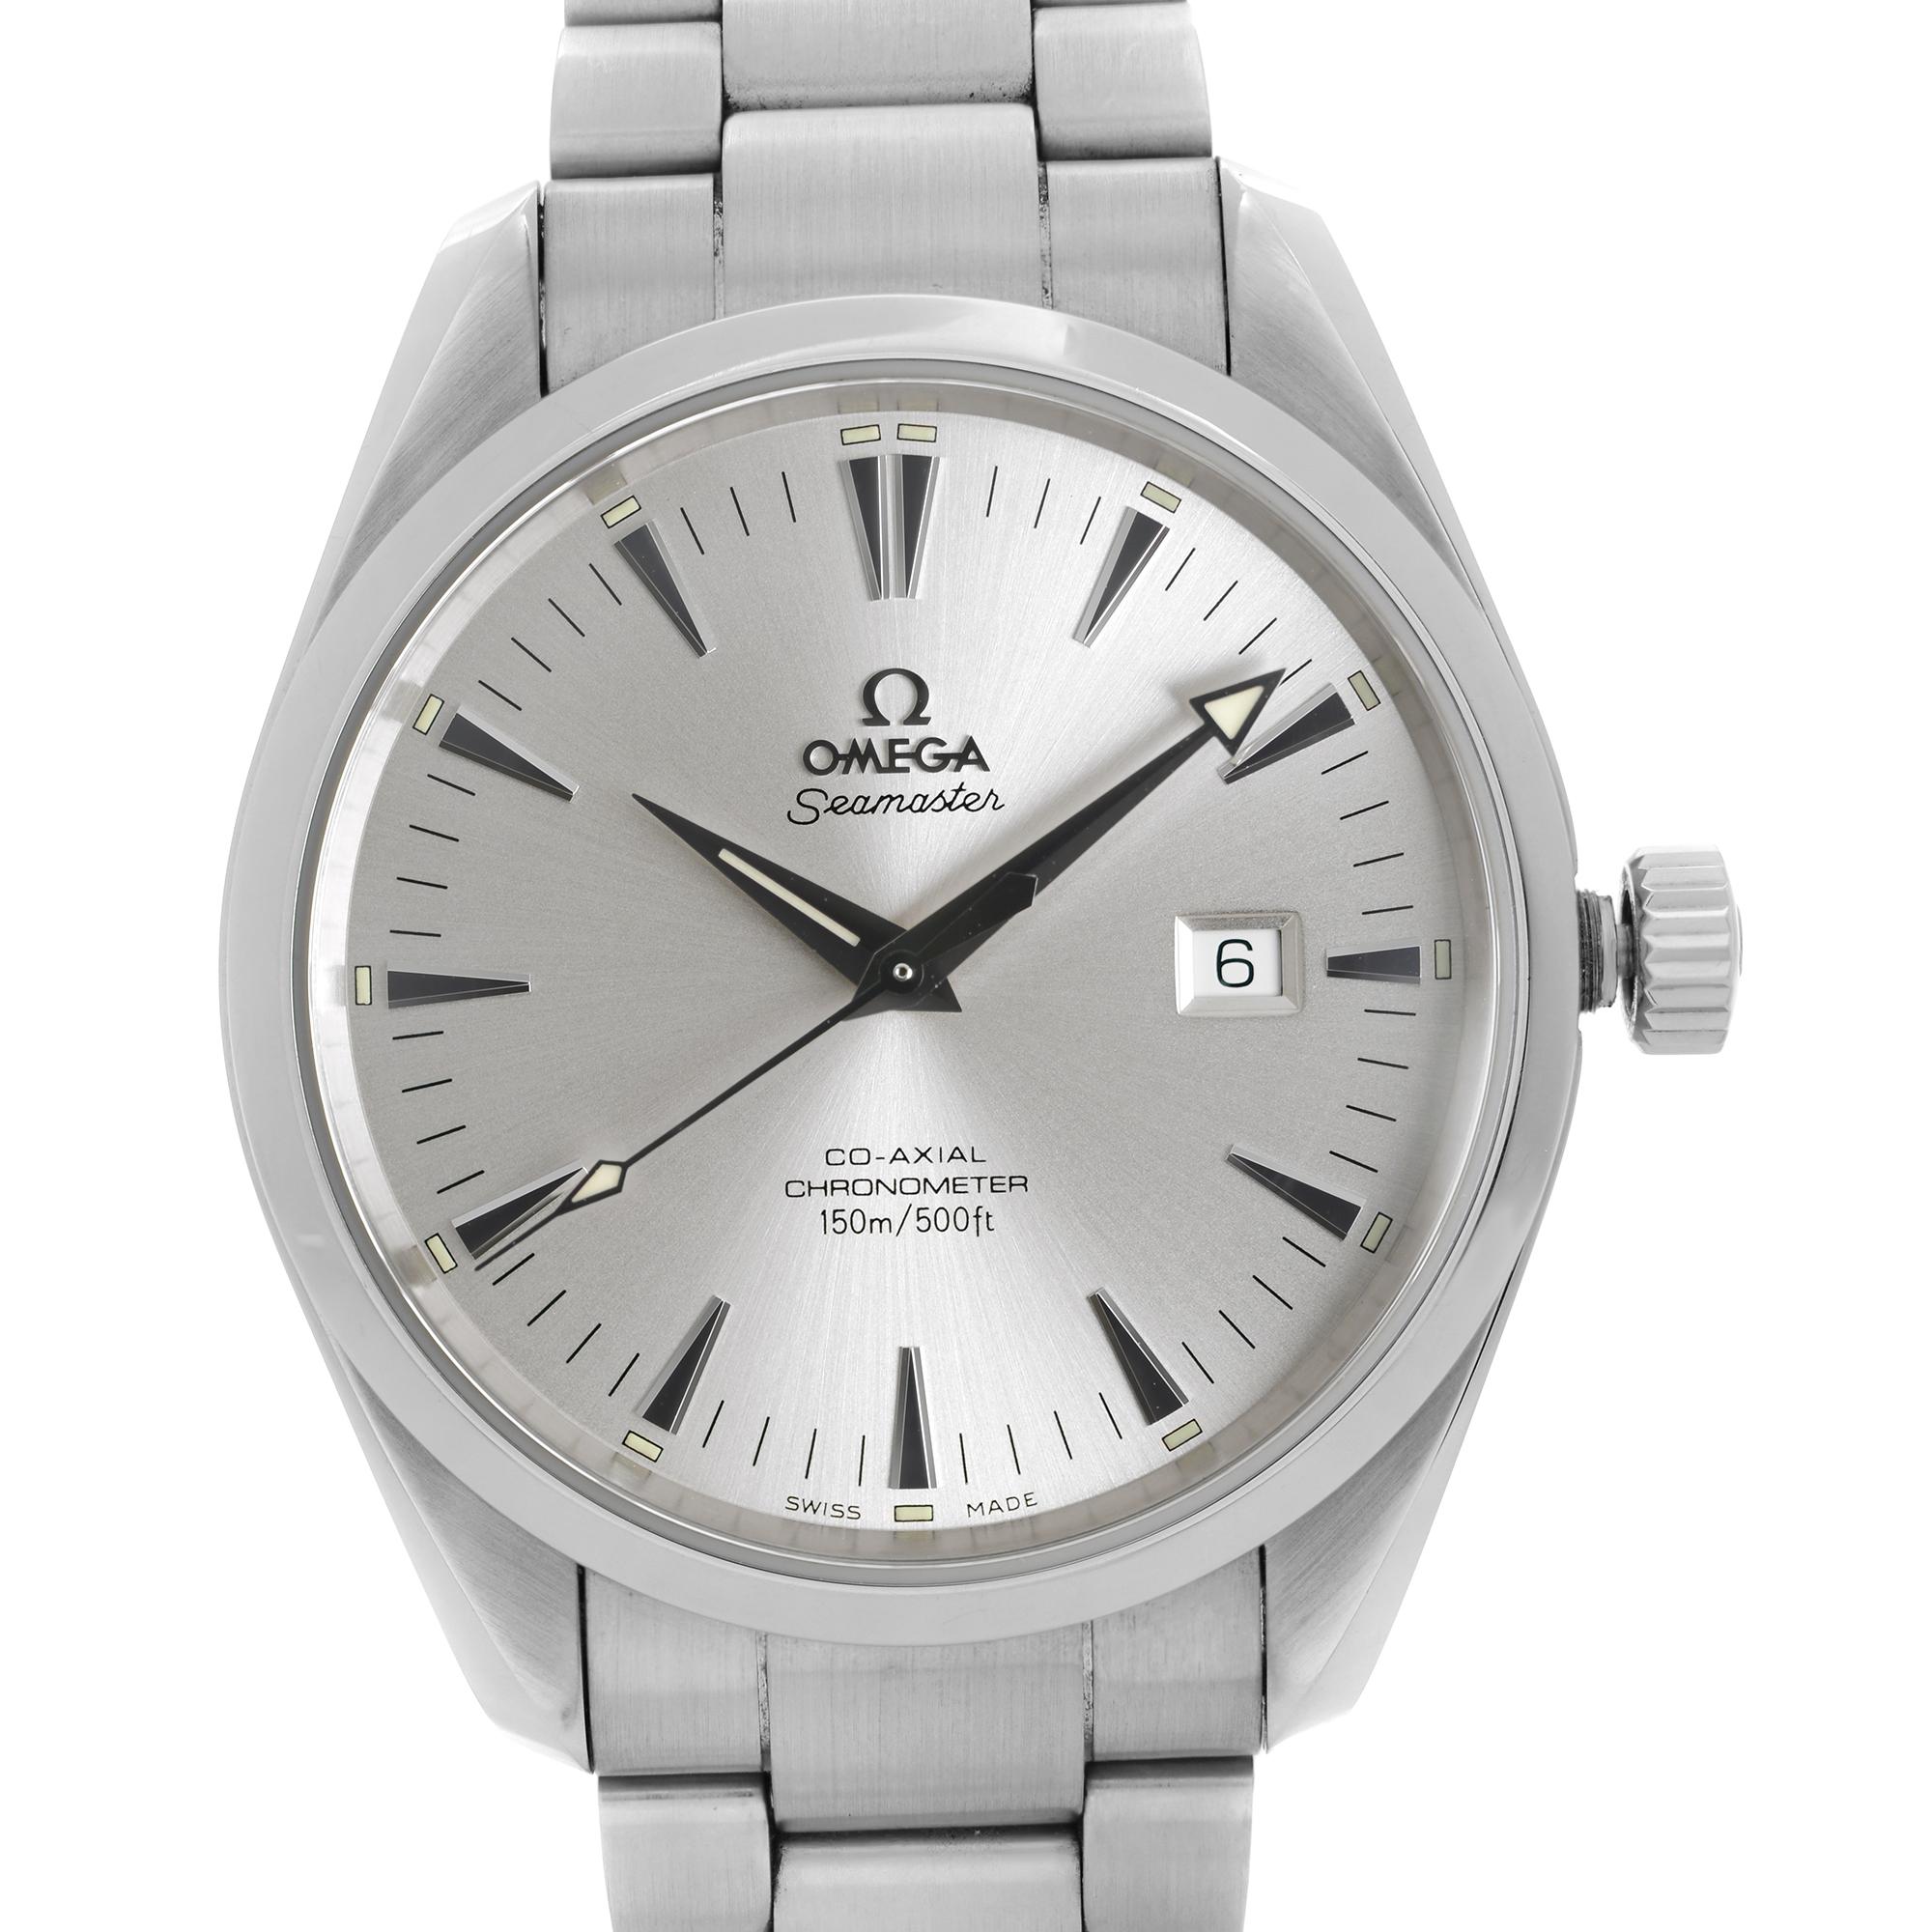 Pre-owned Omega Seamaster Aqua Terra 42mm Stainless Steel Silver Dial Men's Automatic Watch 2502.30.00. This Watch was Produced in 2006. The Timepiece is powered by an Automatic movement. Features: Brushed Stainless Steel Case and Steel Bracelet.